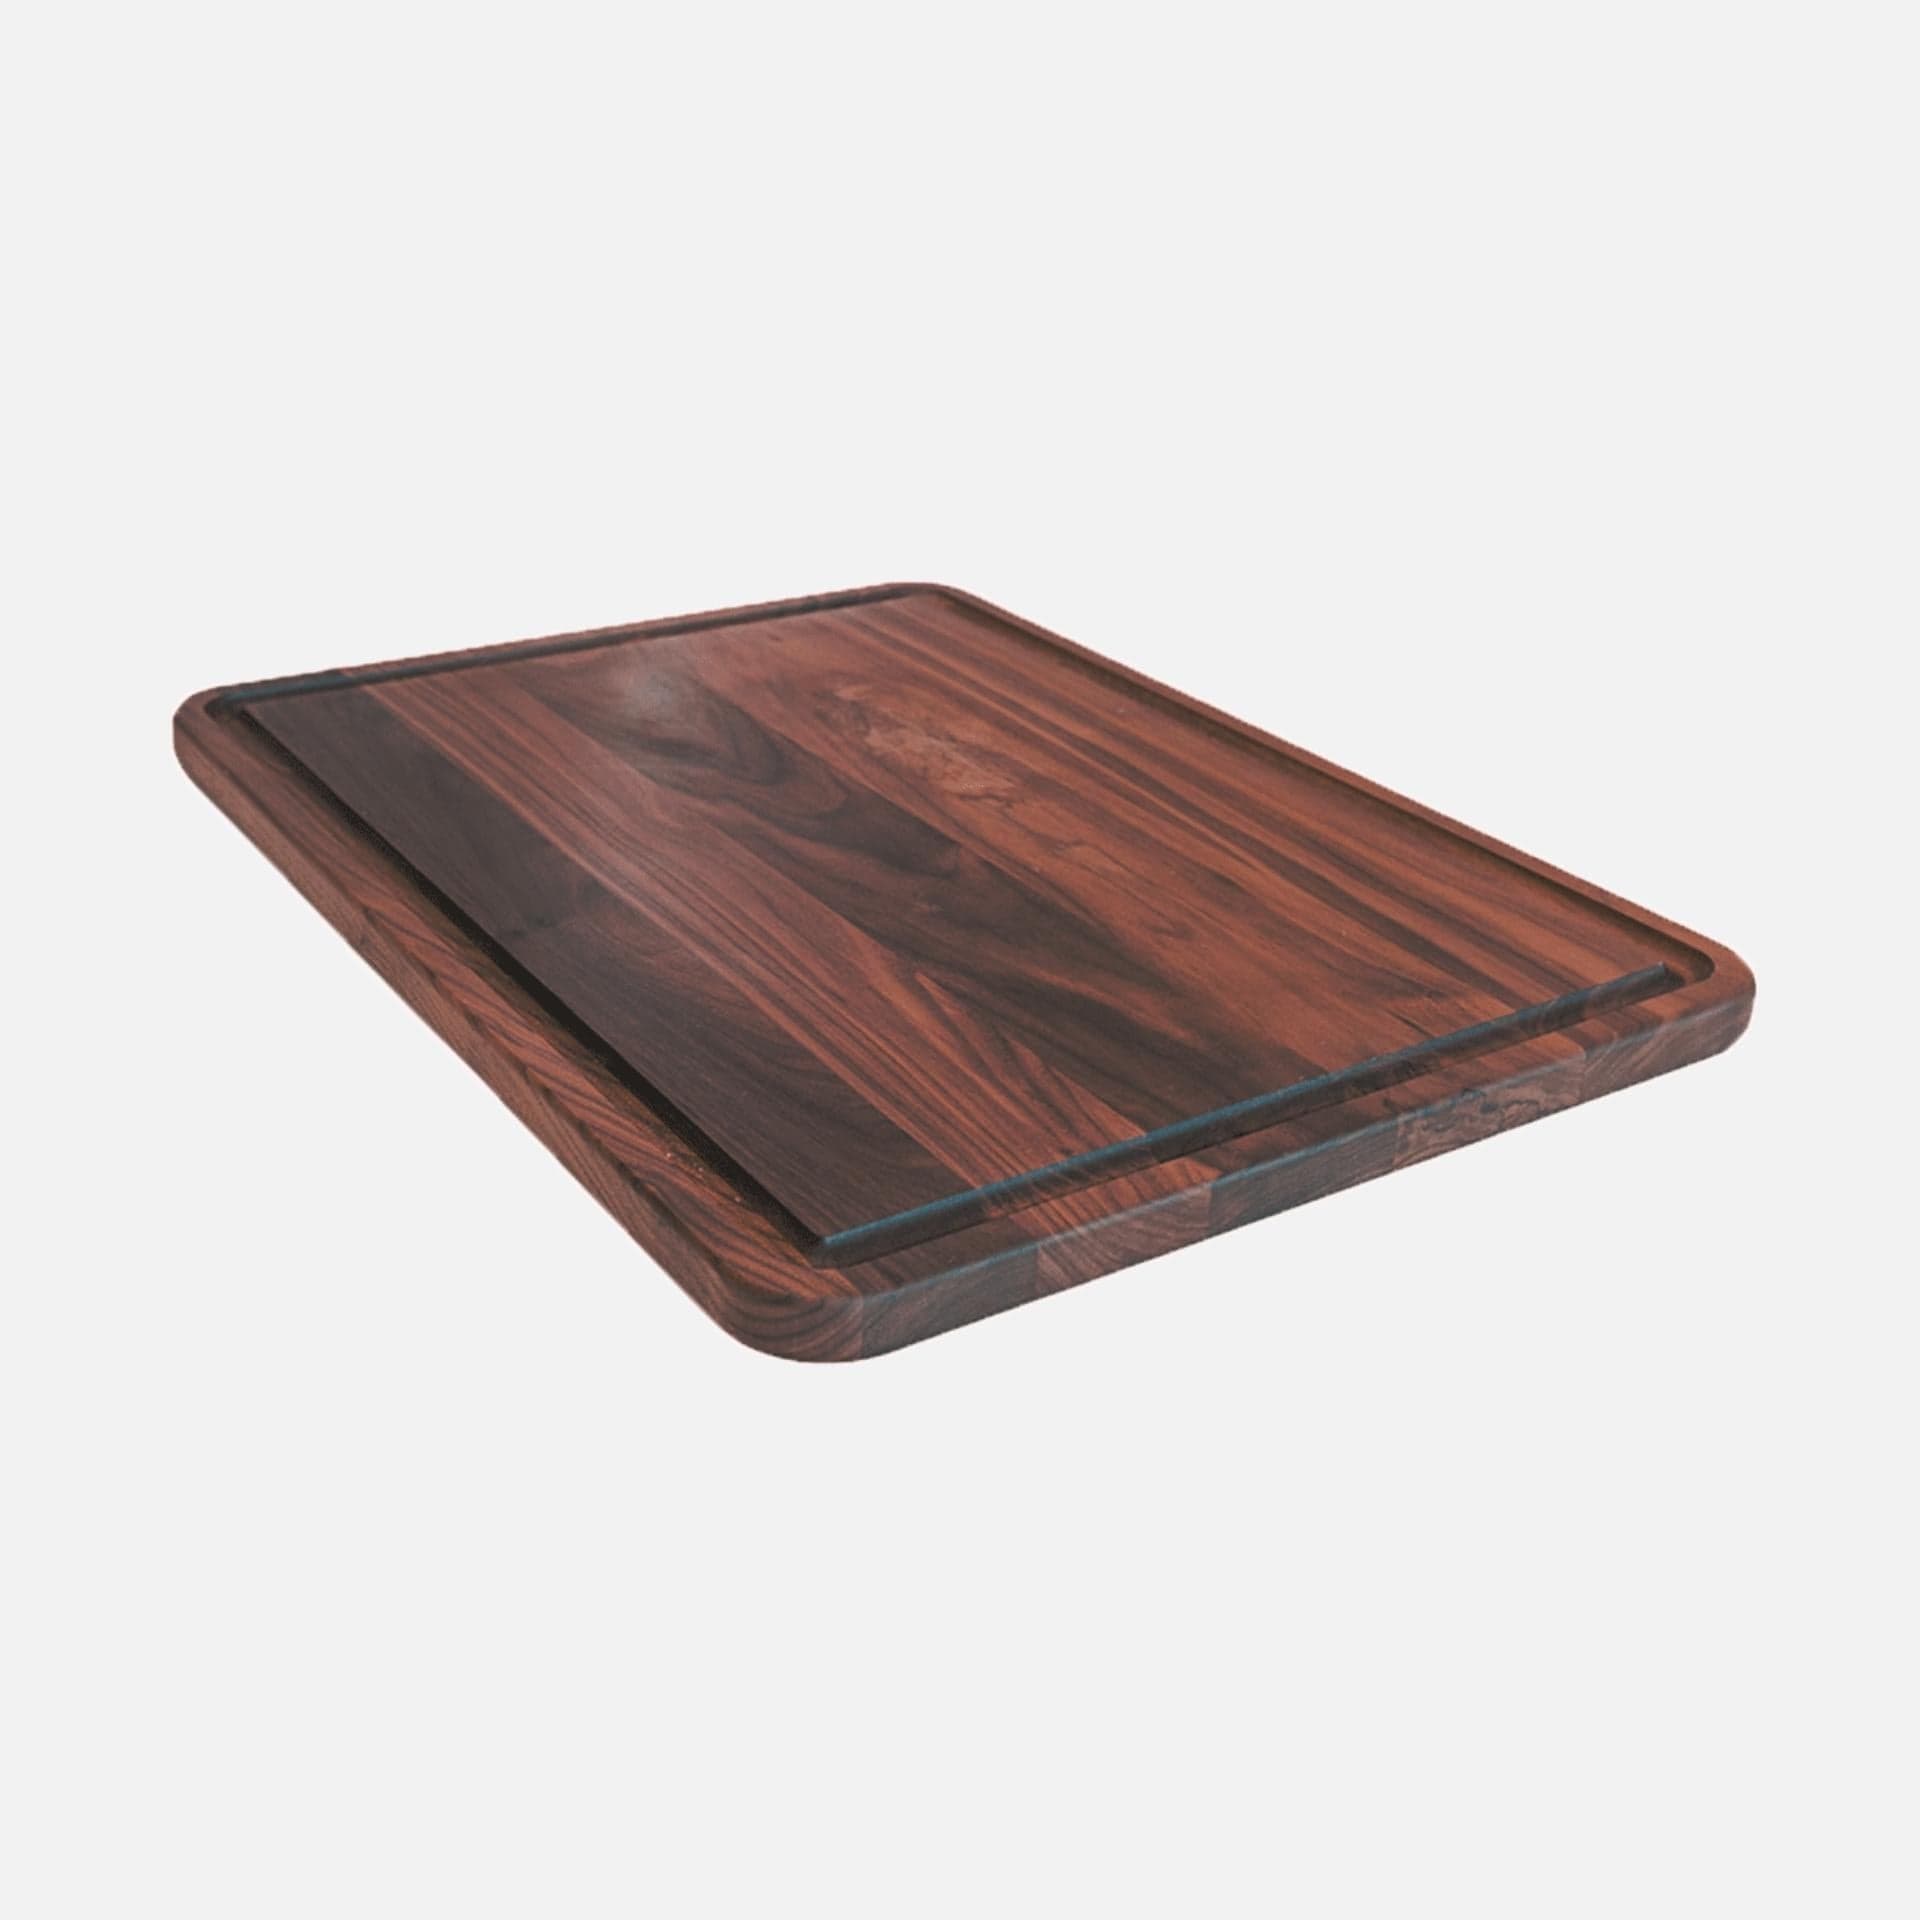 https://yumcrunch.com/cdn/shop/products/virginia-boys-kitchens-20x15-in-large-walnut-cutting-board-with-juice-drip-groove-made-in-usa-large-15-x-20-walnut-board-reversible-with-juice-groove-cutting-board-made-in-usa-from-su.jpg?v=1689278162&width=1946